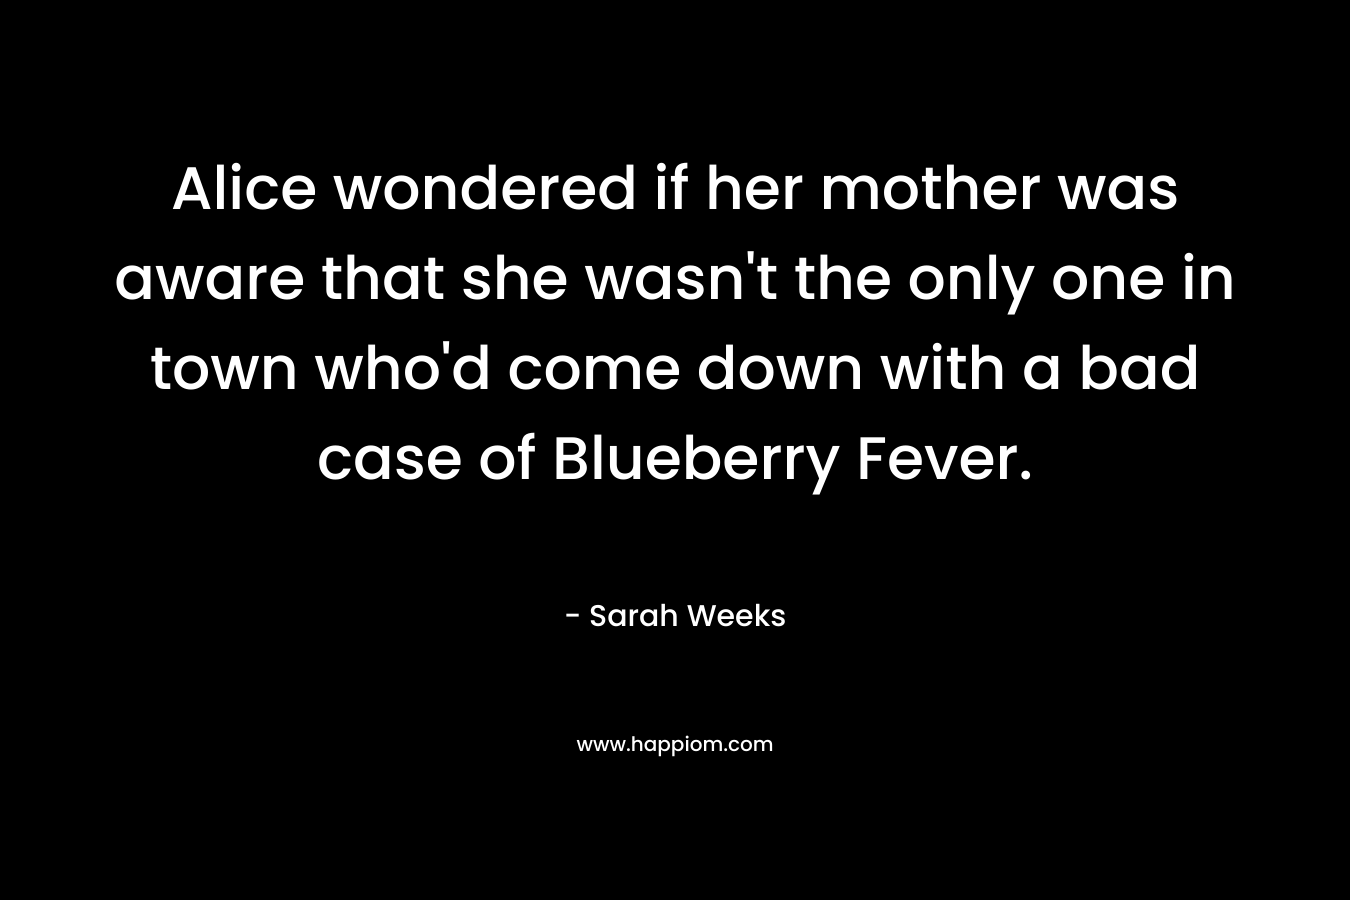 Alice wondered if her mother was aware that she wasn’t the only one in town who’d come down with a bad case of Blueberry Fever. – Sarah Weeks